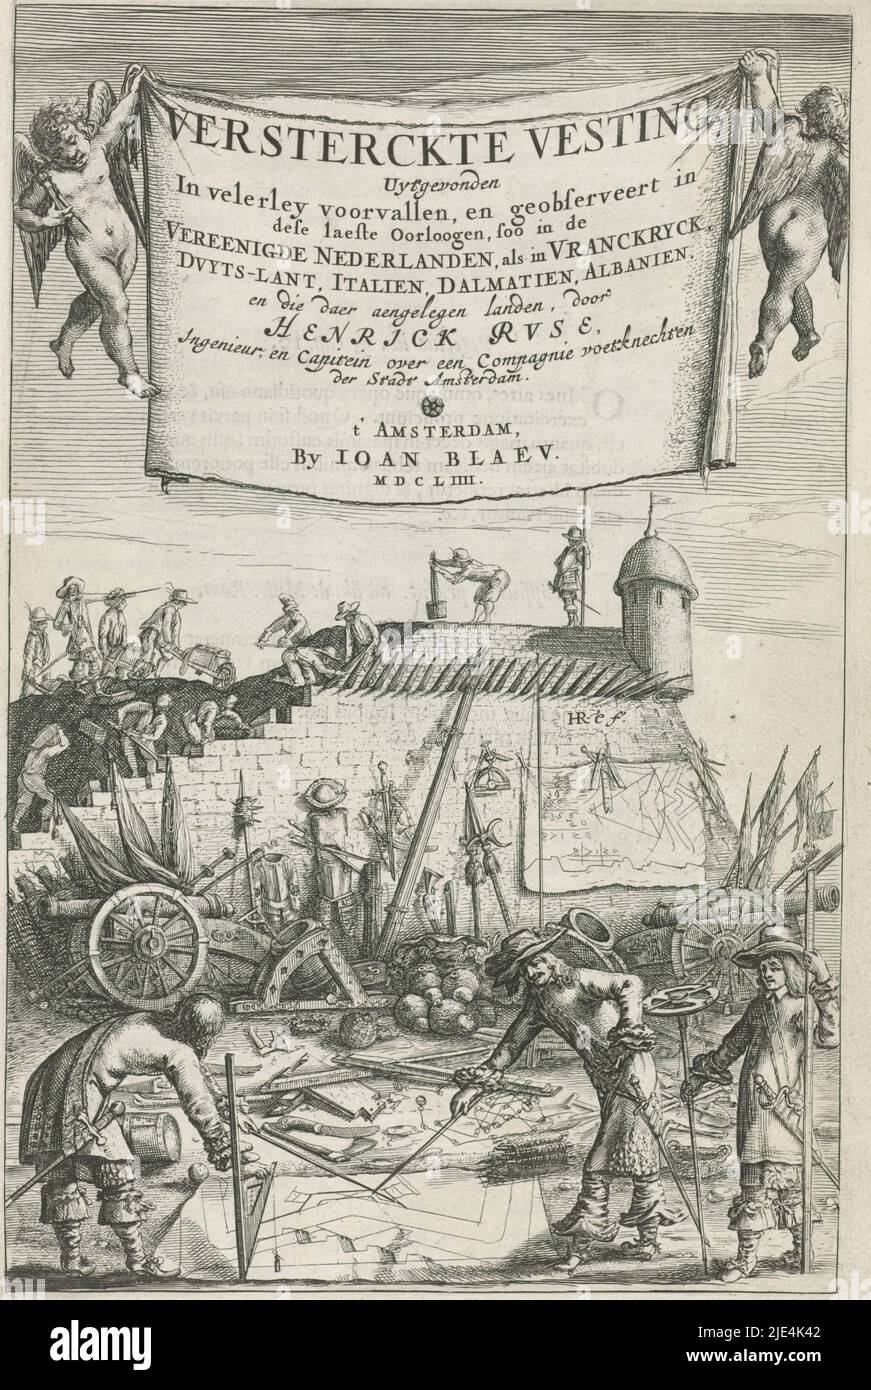 Title page for Henrich Ruse, Versterckte Vesting, 1654, Hendrick baron van Ruse van Rysensteen, 1654, Below the title are several men building a fortress wall. In the foreground three men with measuring instruments and a map of a fortification wall. In front of the rampart are weapons and flags, and on the rampart are measuring instruments and a sheet with calculations., print maker: Hendrick baron van Ruse van Rysensteen, (mentioned on object), publisher: Johannes Willemszoon Blaeu, (mentioned on object), Amsterdam, 1654, paper, etching, engraving, h 261 mm × w 171 mm Stock Photo